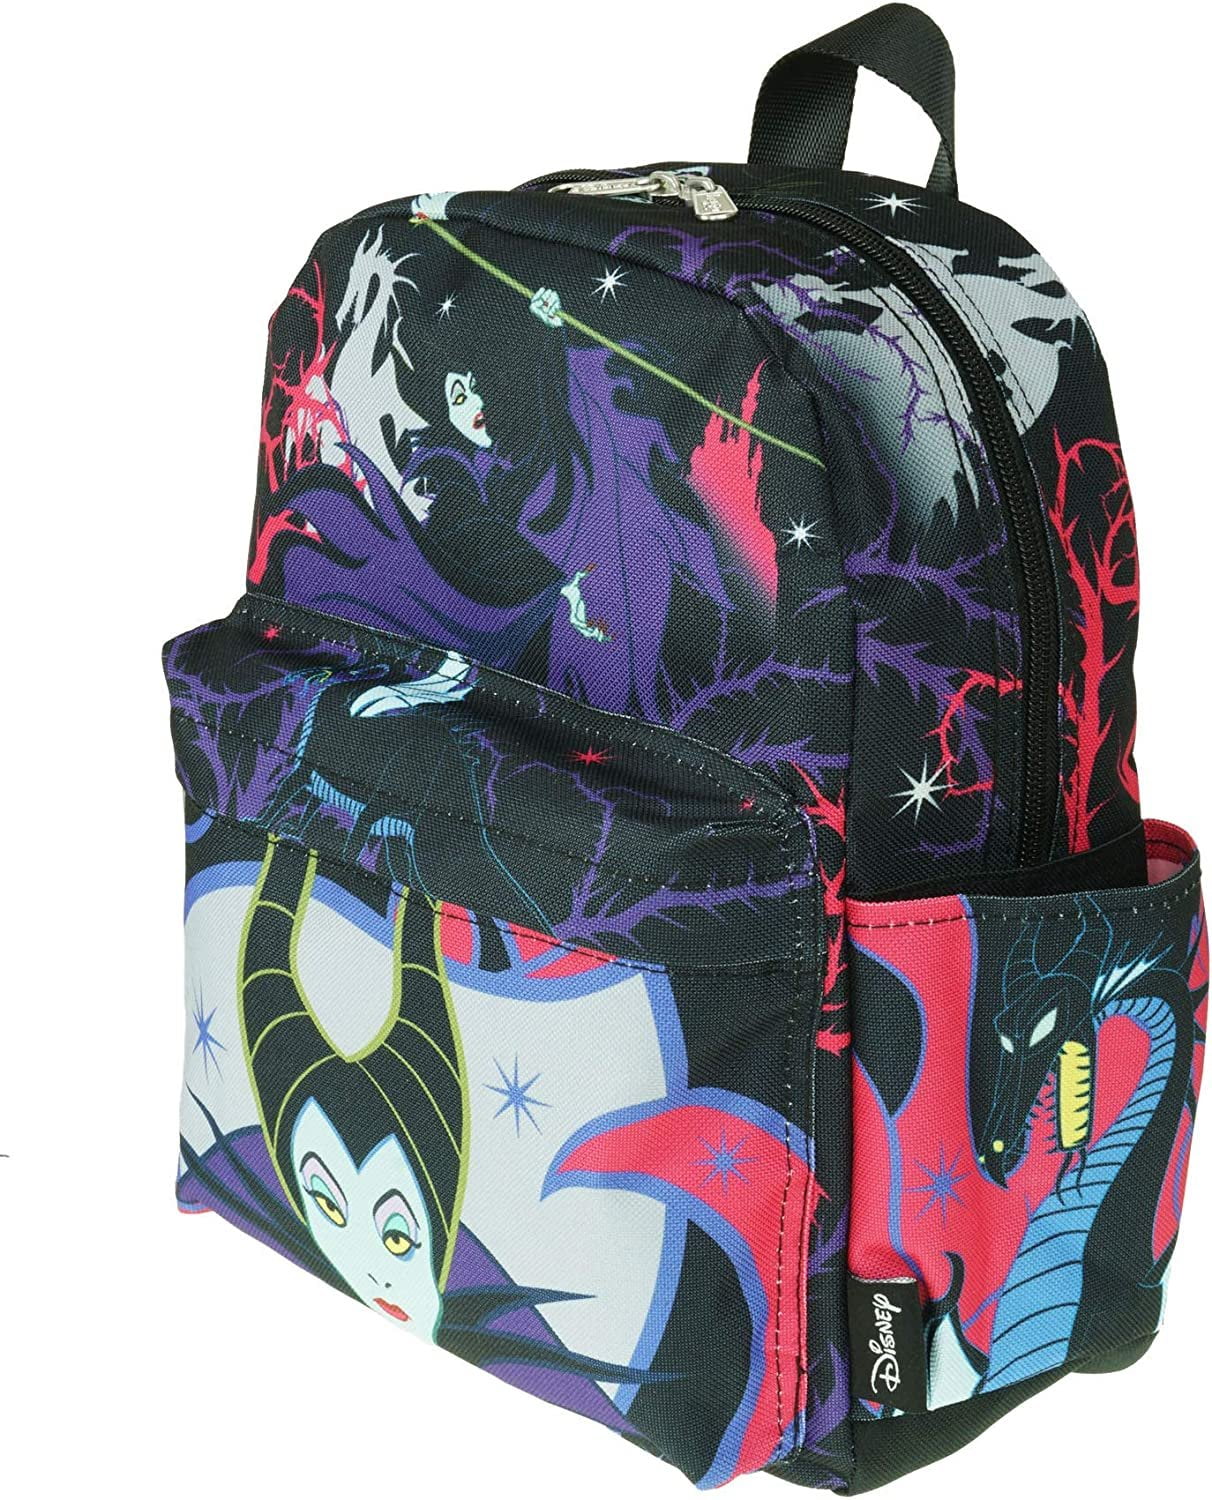 Disney Maleficent 12 Deluxe Oversize Print Daypack - A21311